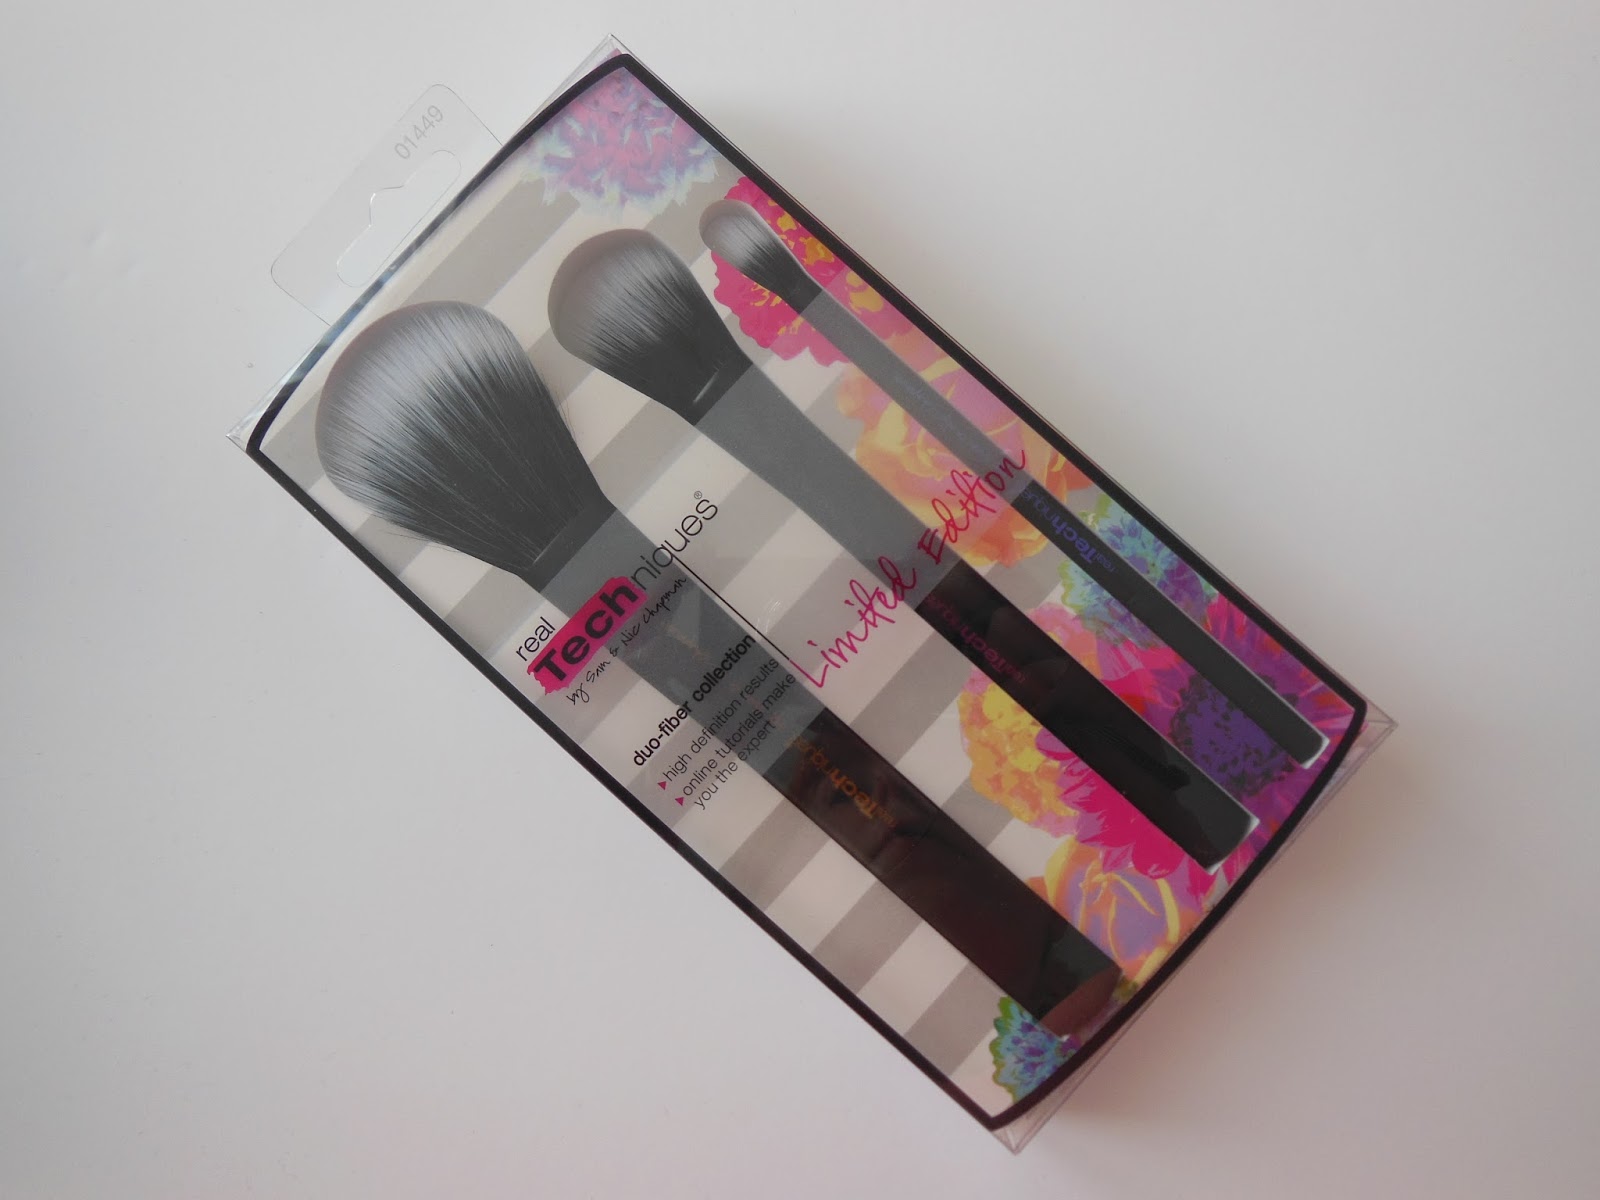 Real Techniques limited edition duo fibre brush set